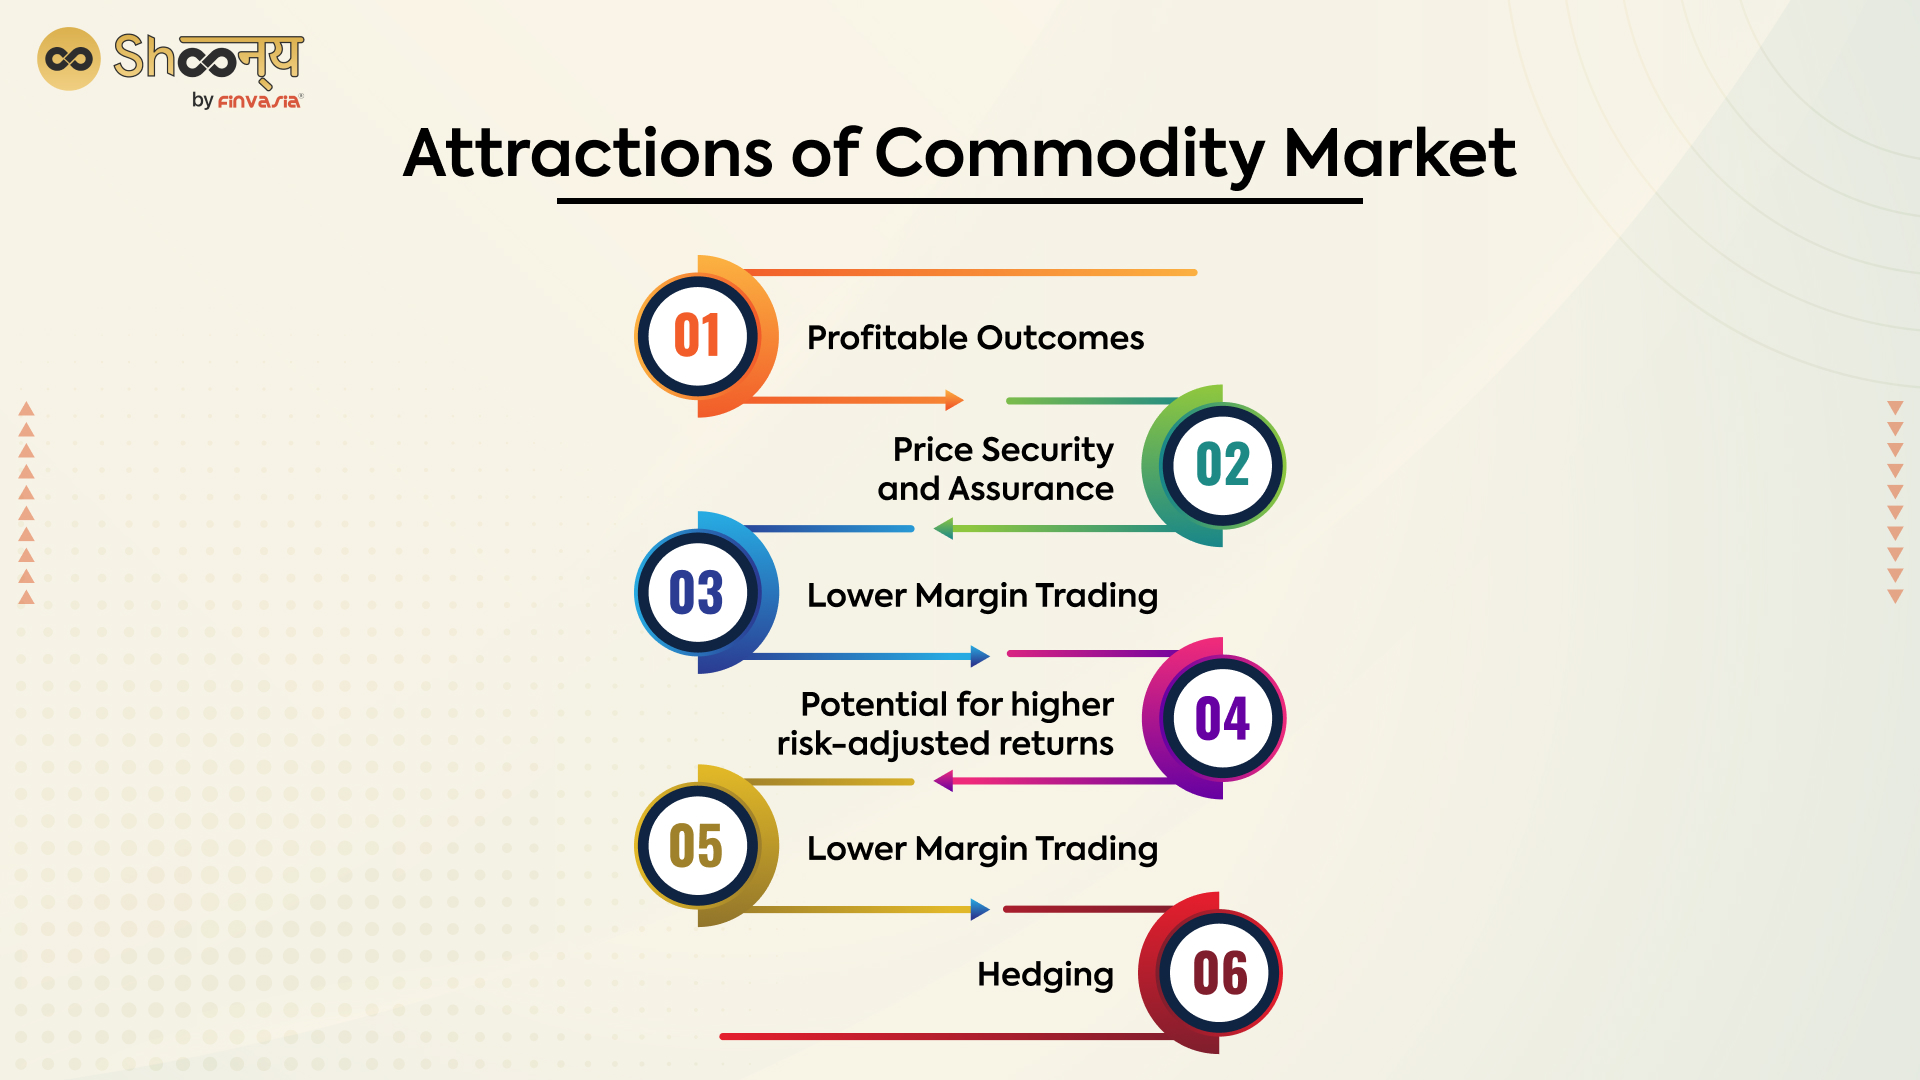 Attractions of Commodity Market